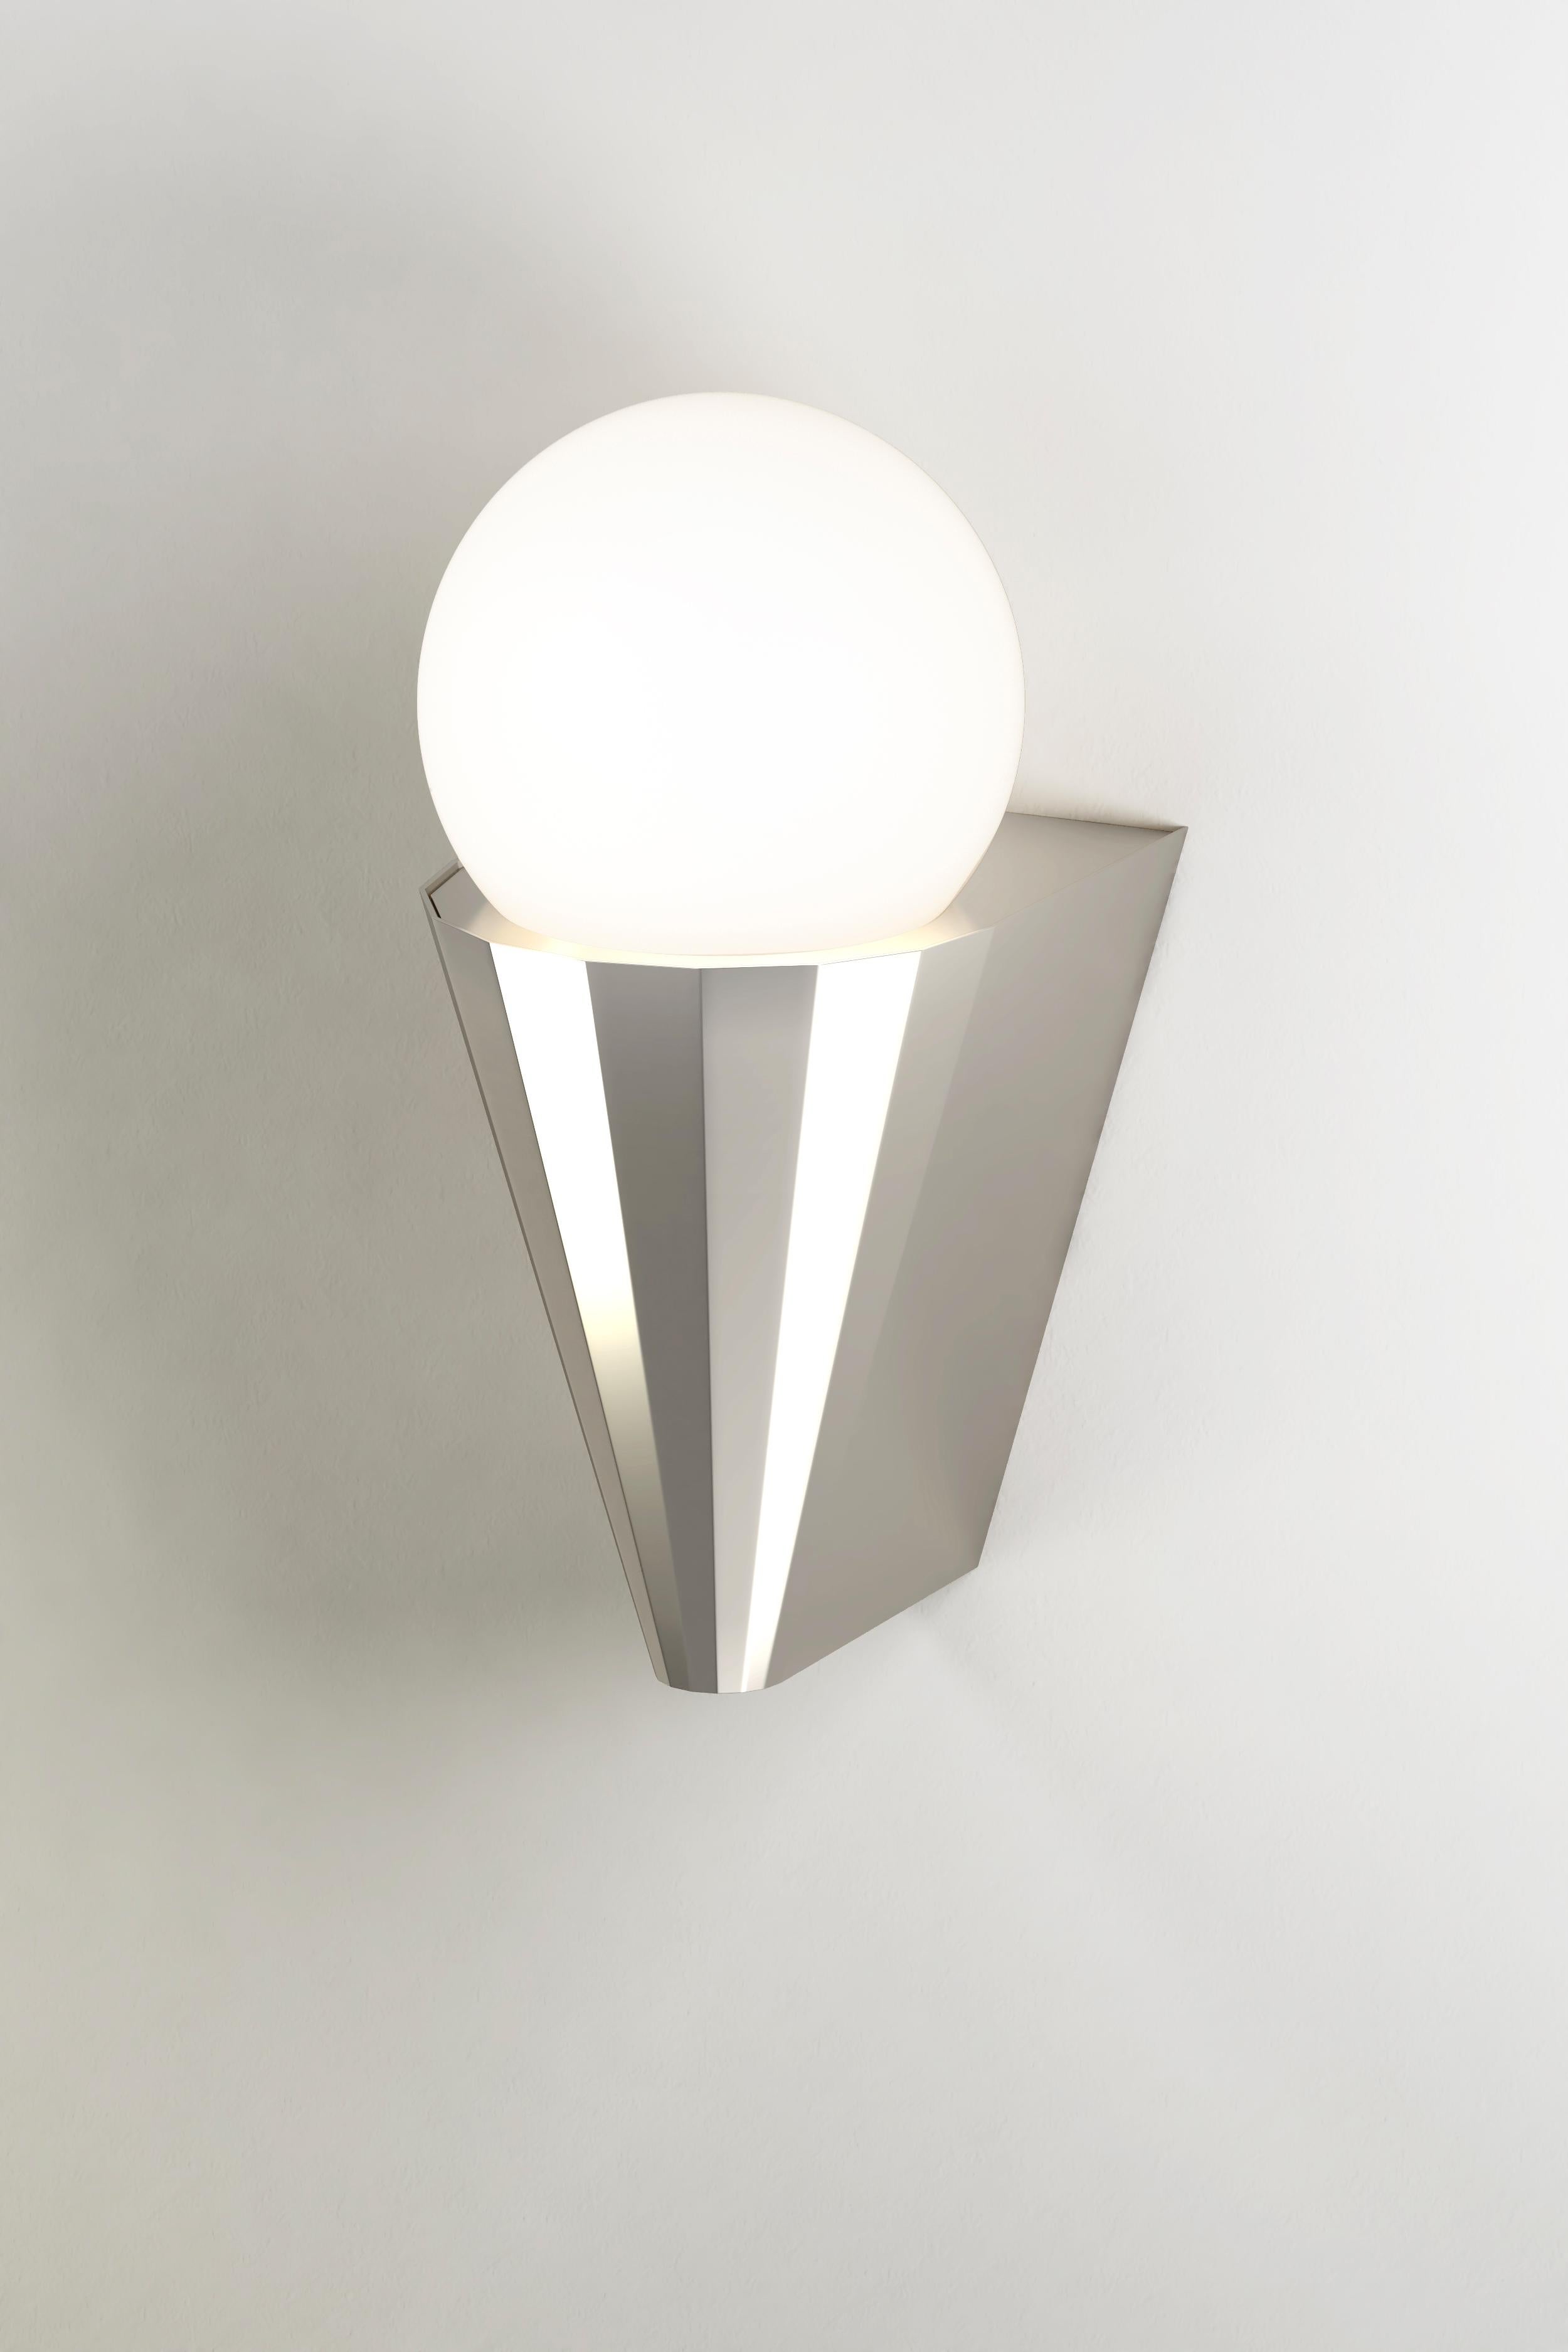 IP Cornet polished nickel wall light by Emilie Cathelineau
Dimensions: D10 x W12.5 X H21.2 cm
Materials: solid brass, polished nickel
Others finishes are available.

All our lamps can be wired according to each country. If sold to the USA it